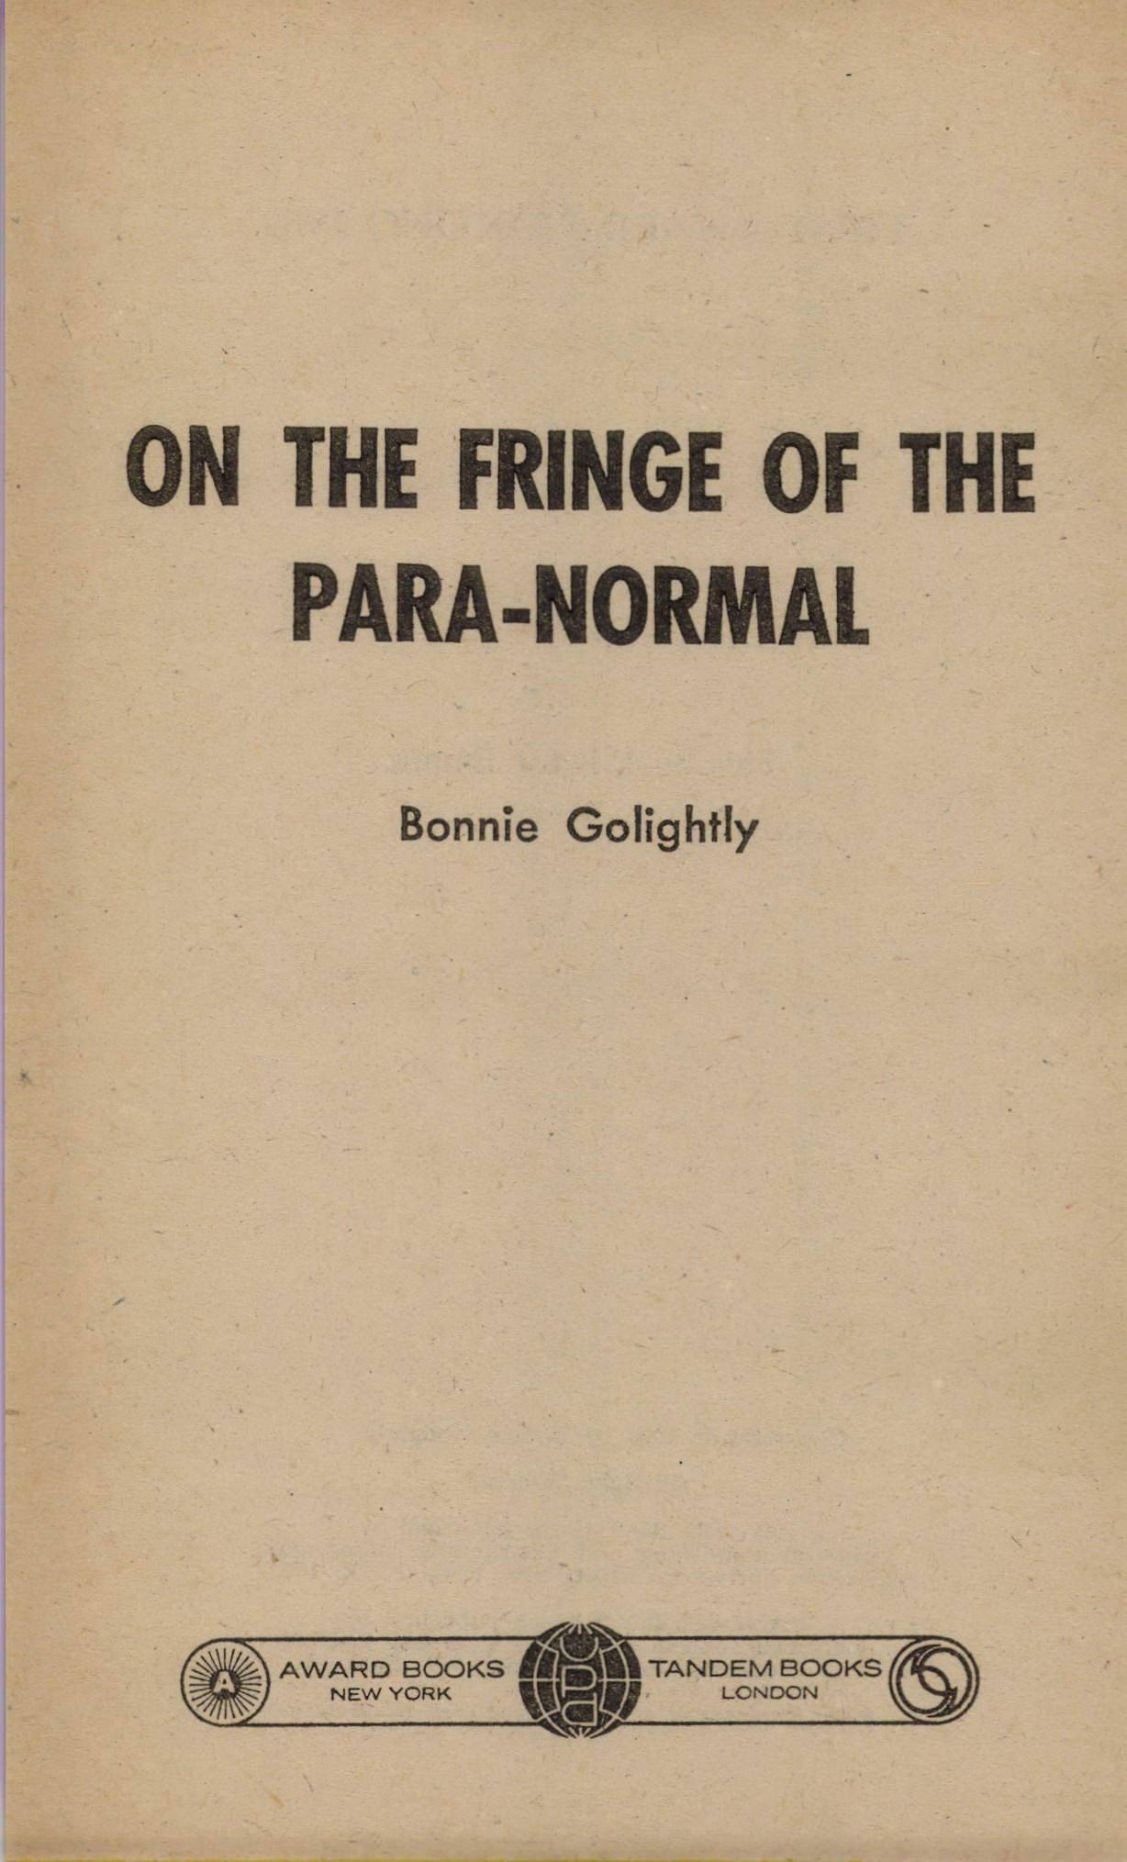 On The Fringe Of The Para-Normal by Bonnie Golightly page 003.jpg